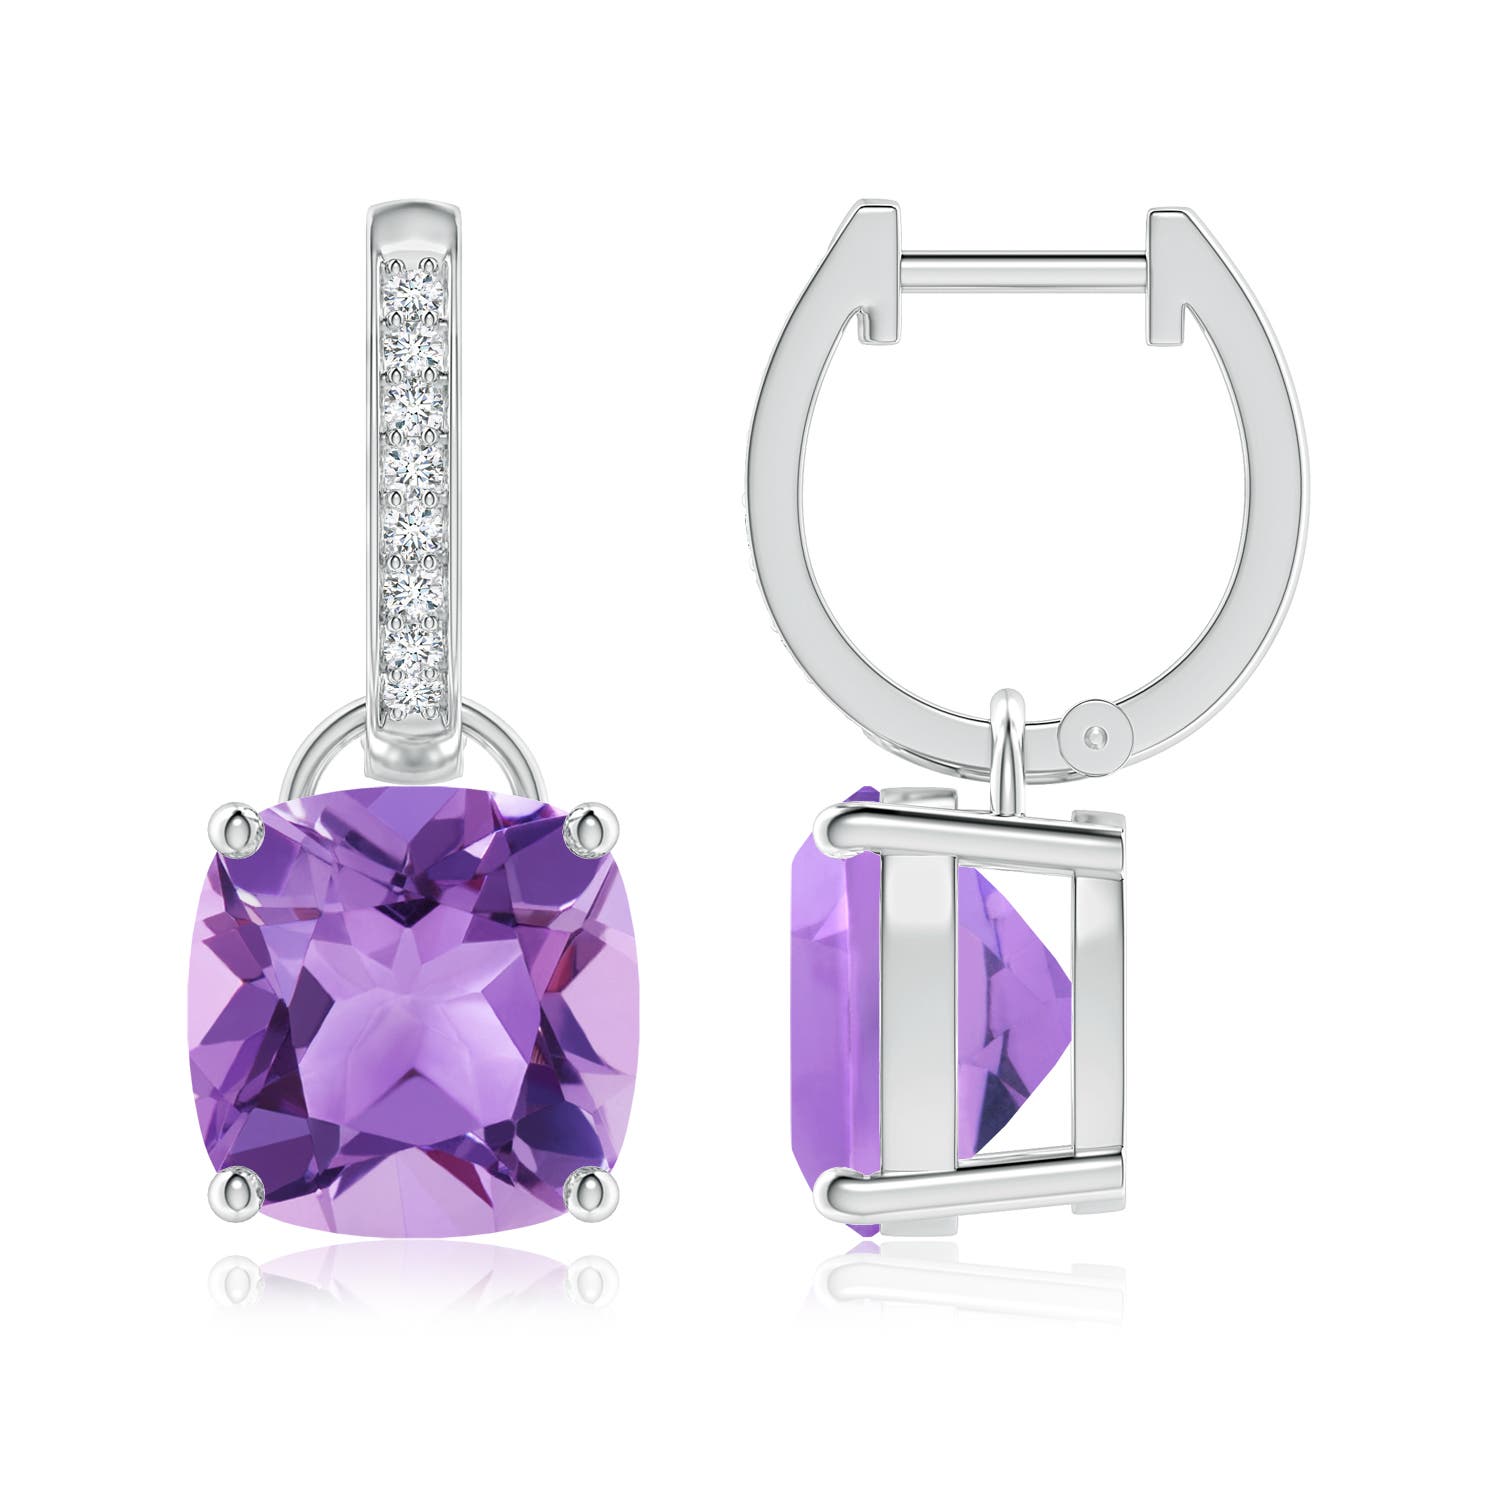 A - Amethyst / 6.33 CT / 14 KT White Gold